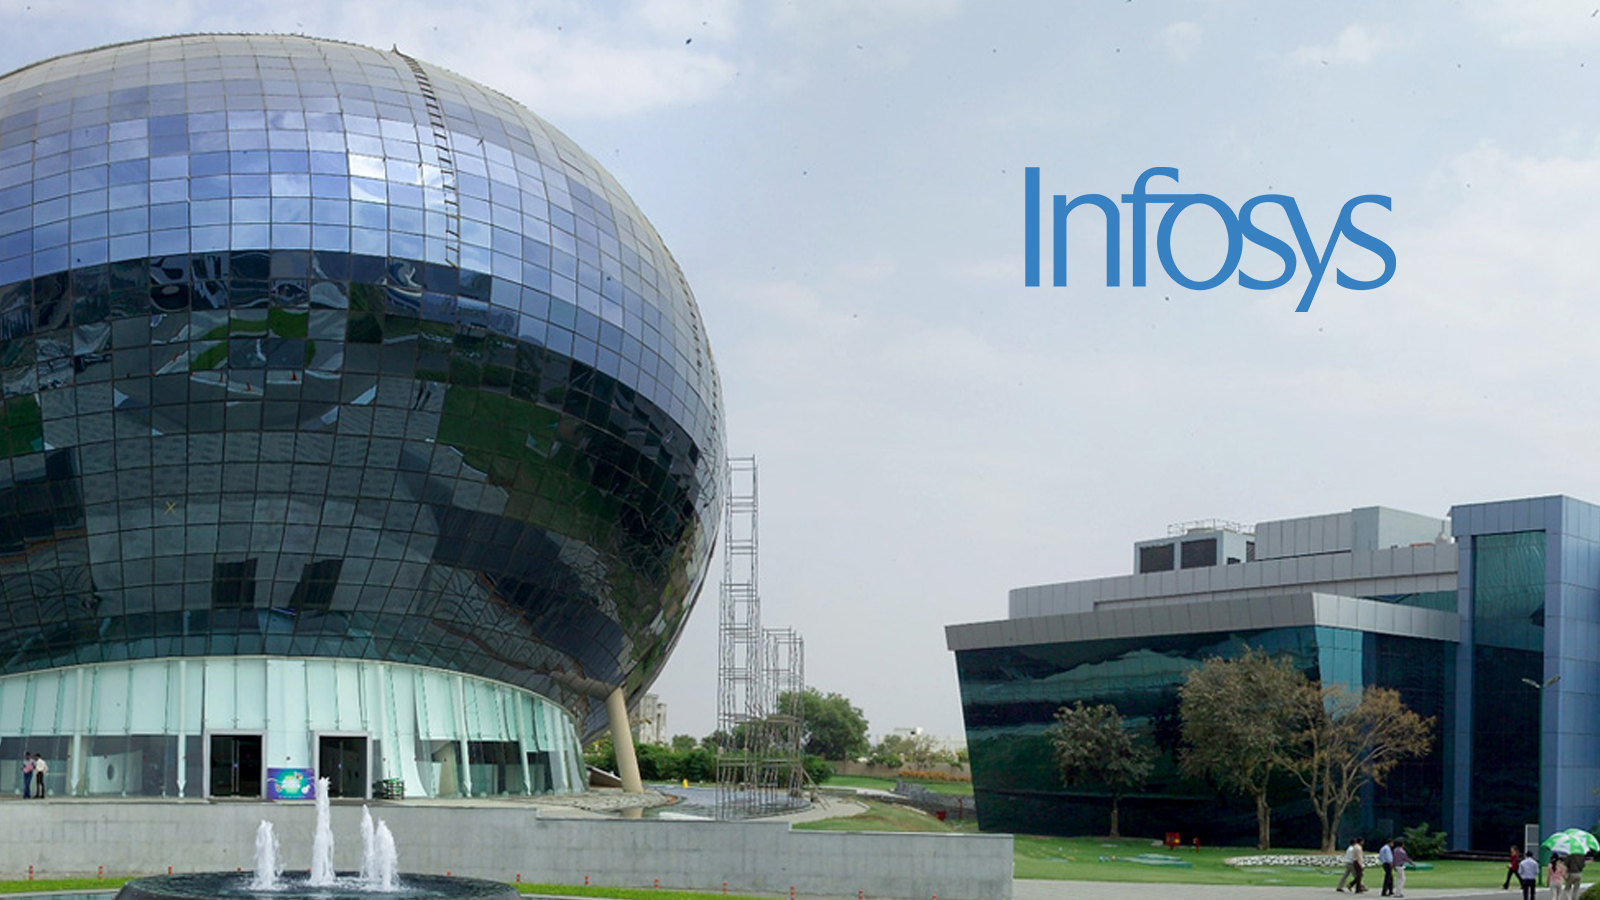 Infosys Ranked Number 3 on 2019 Forbes 'World's Best Regarded